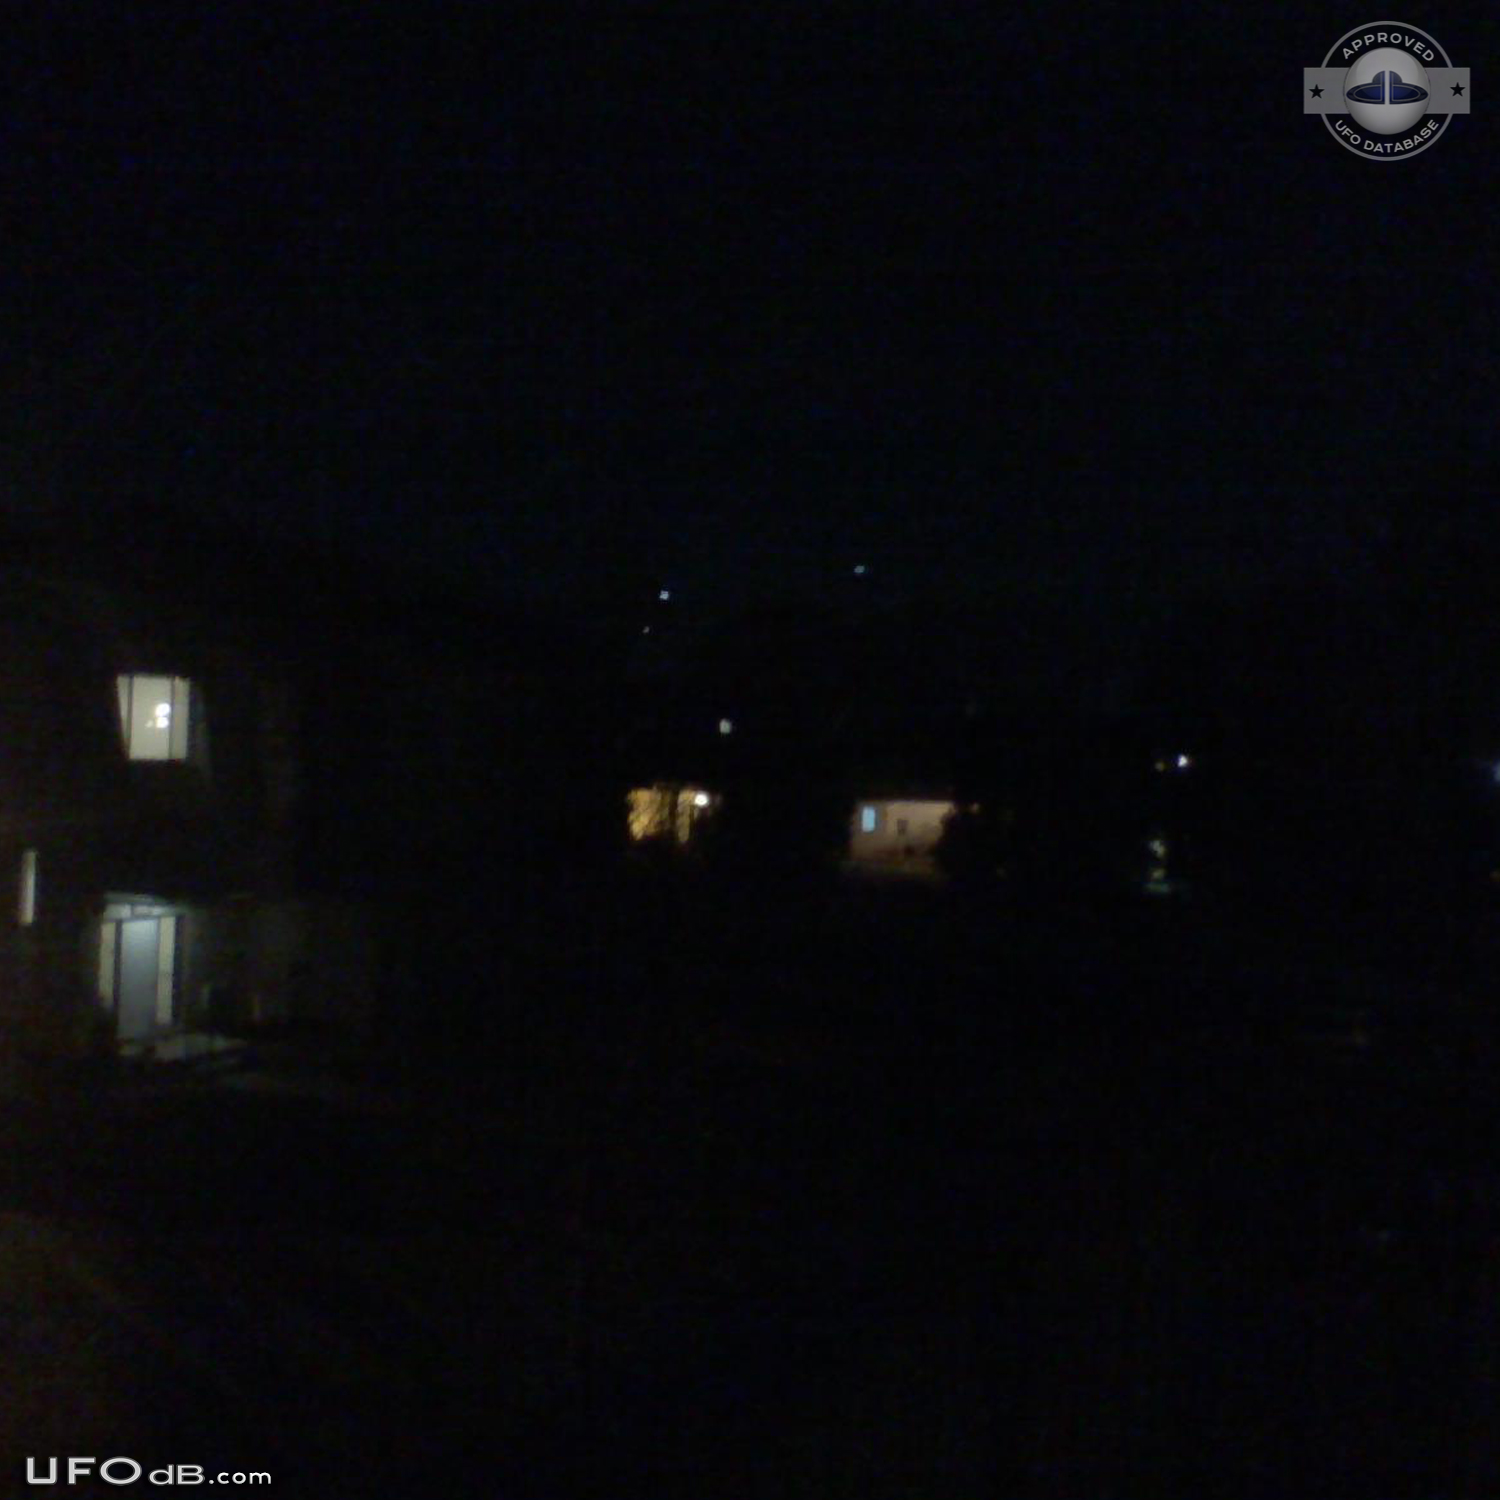 At least 20 UFOs flying near each other very bright & fast Westland MI UFO Picture #548-2